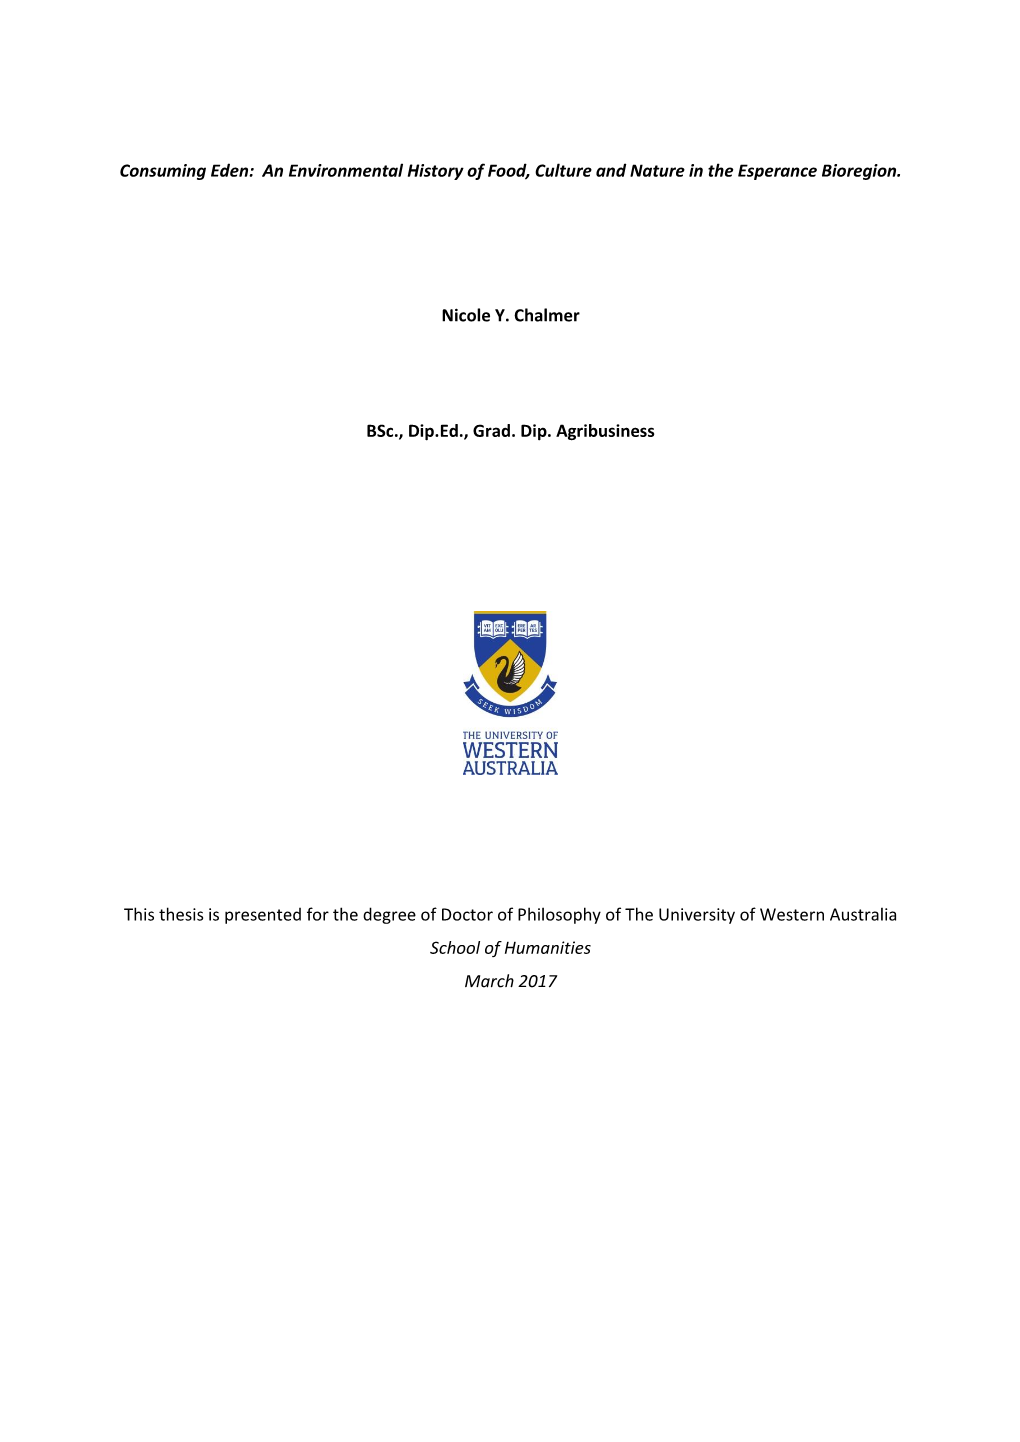 Thesis Is Presented for the Degree of Doctor of Philosophy of the University of Western Australia School of Humanities March 2017 THESIS DECLARATION